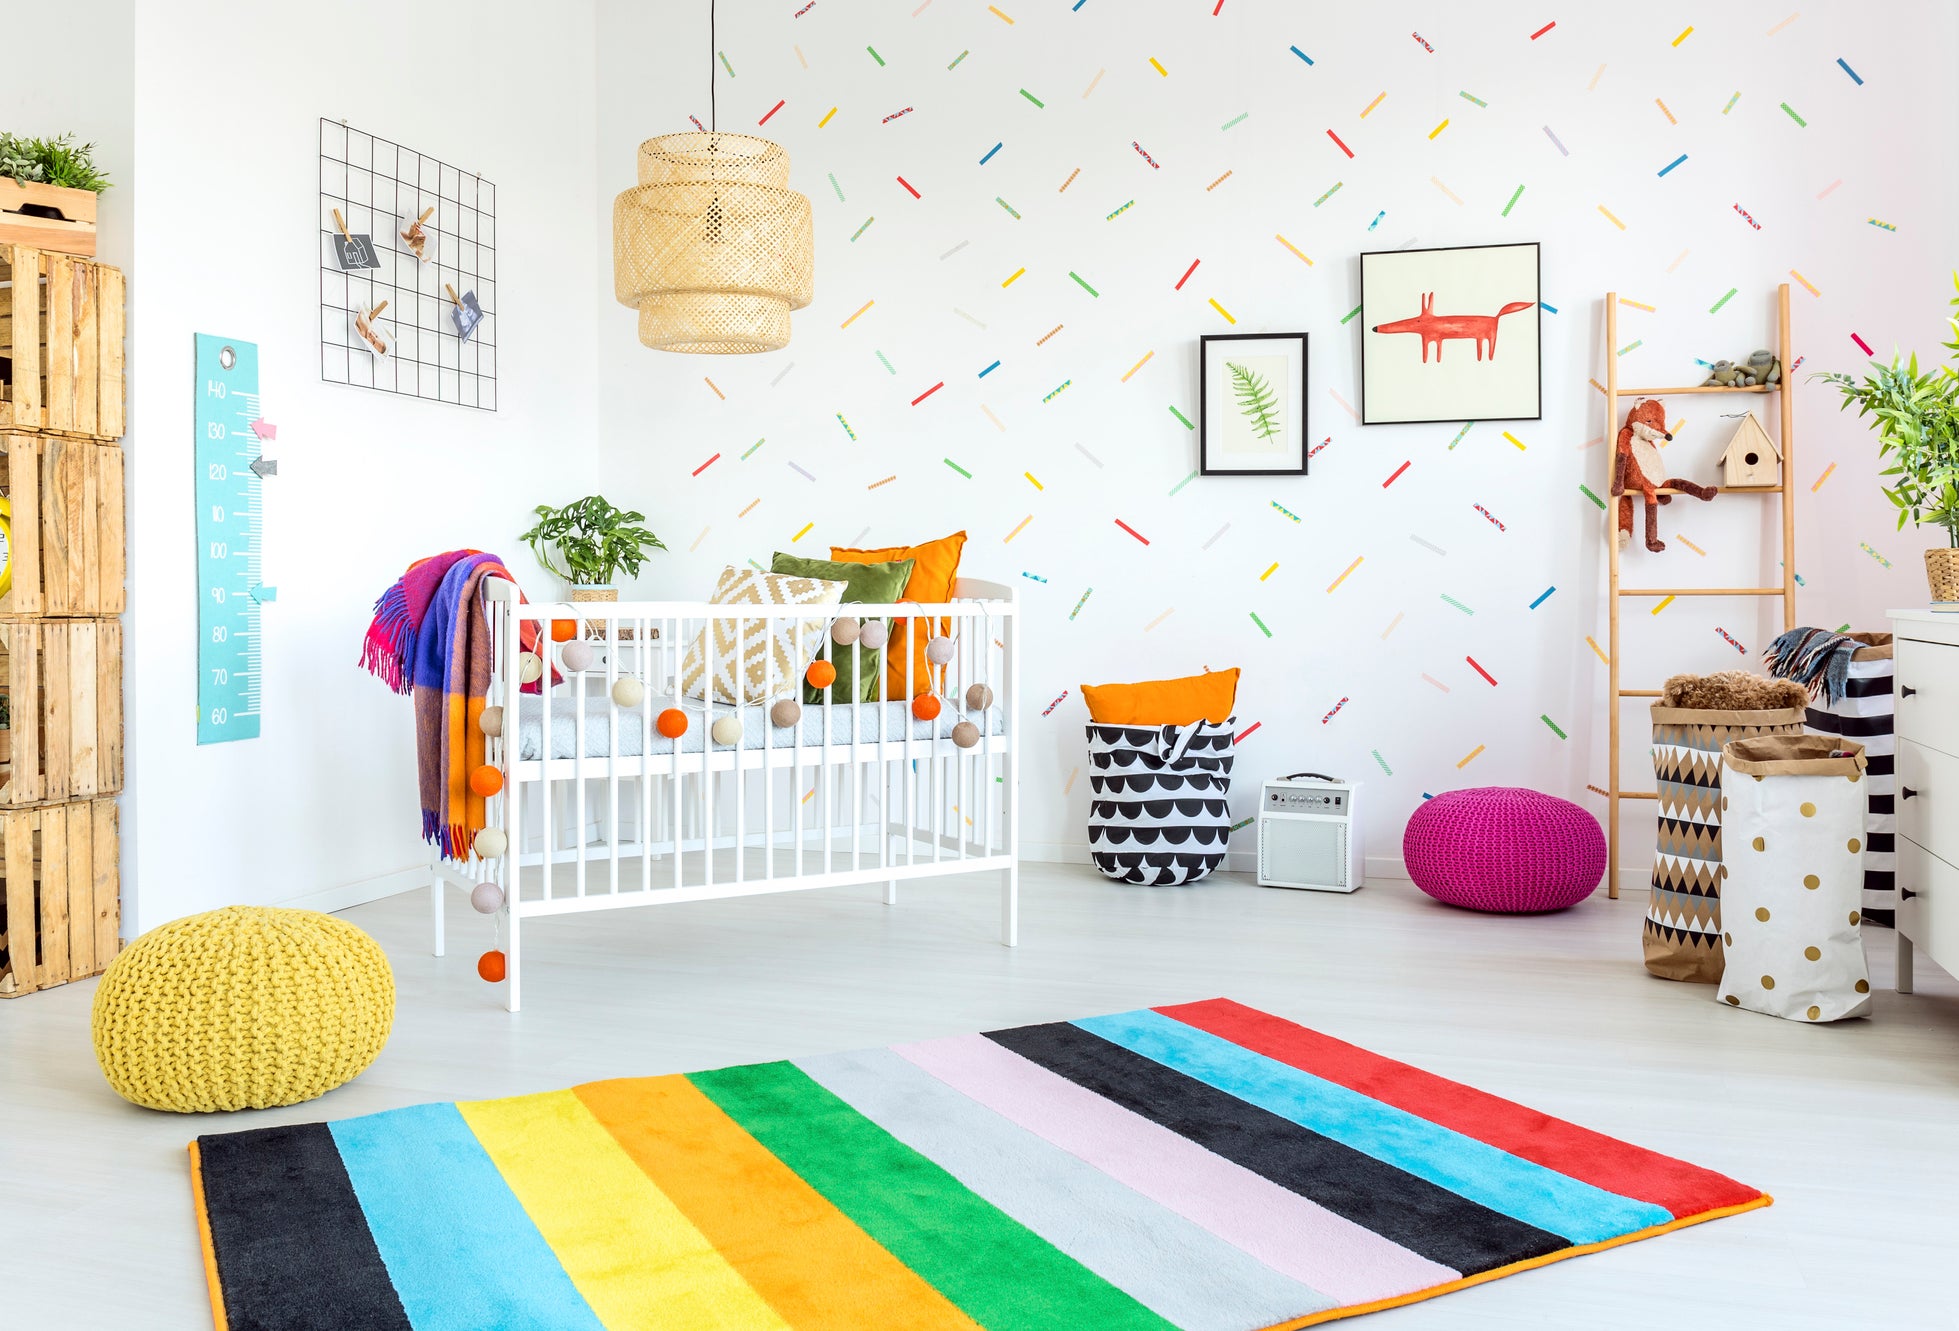 Colorful nursery room with a crib, storage shelves, and a rainbow-striped rug. No persons present